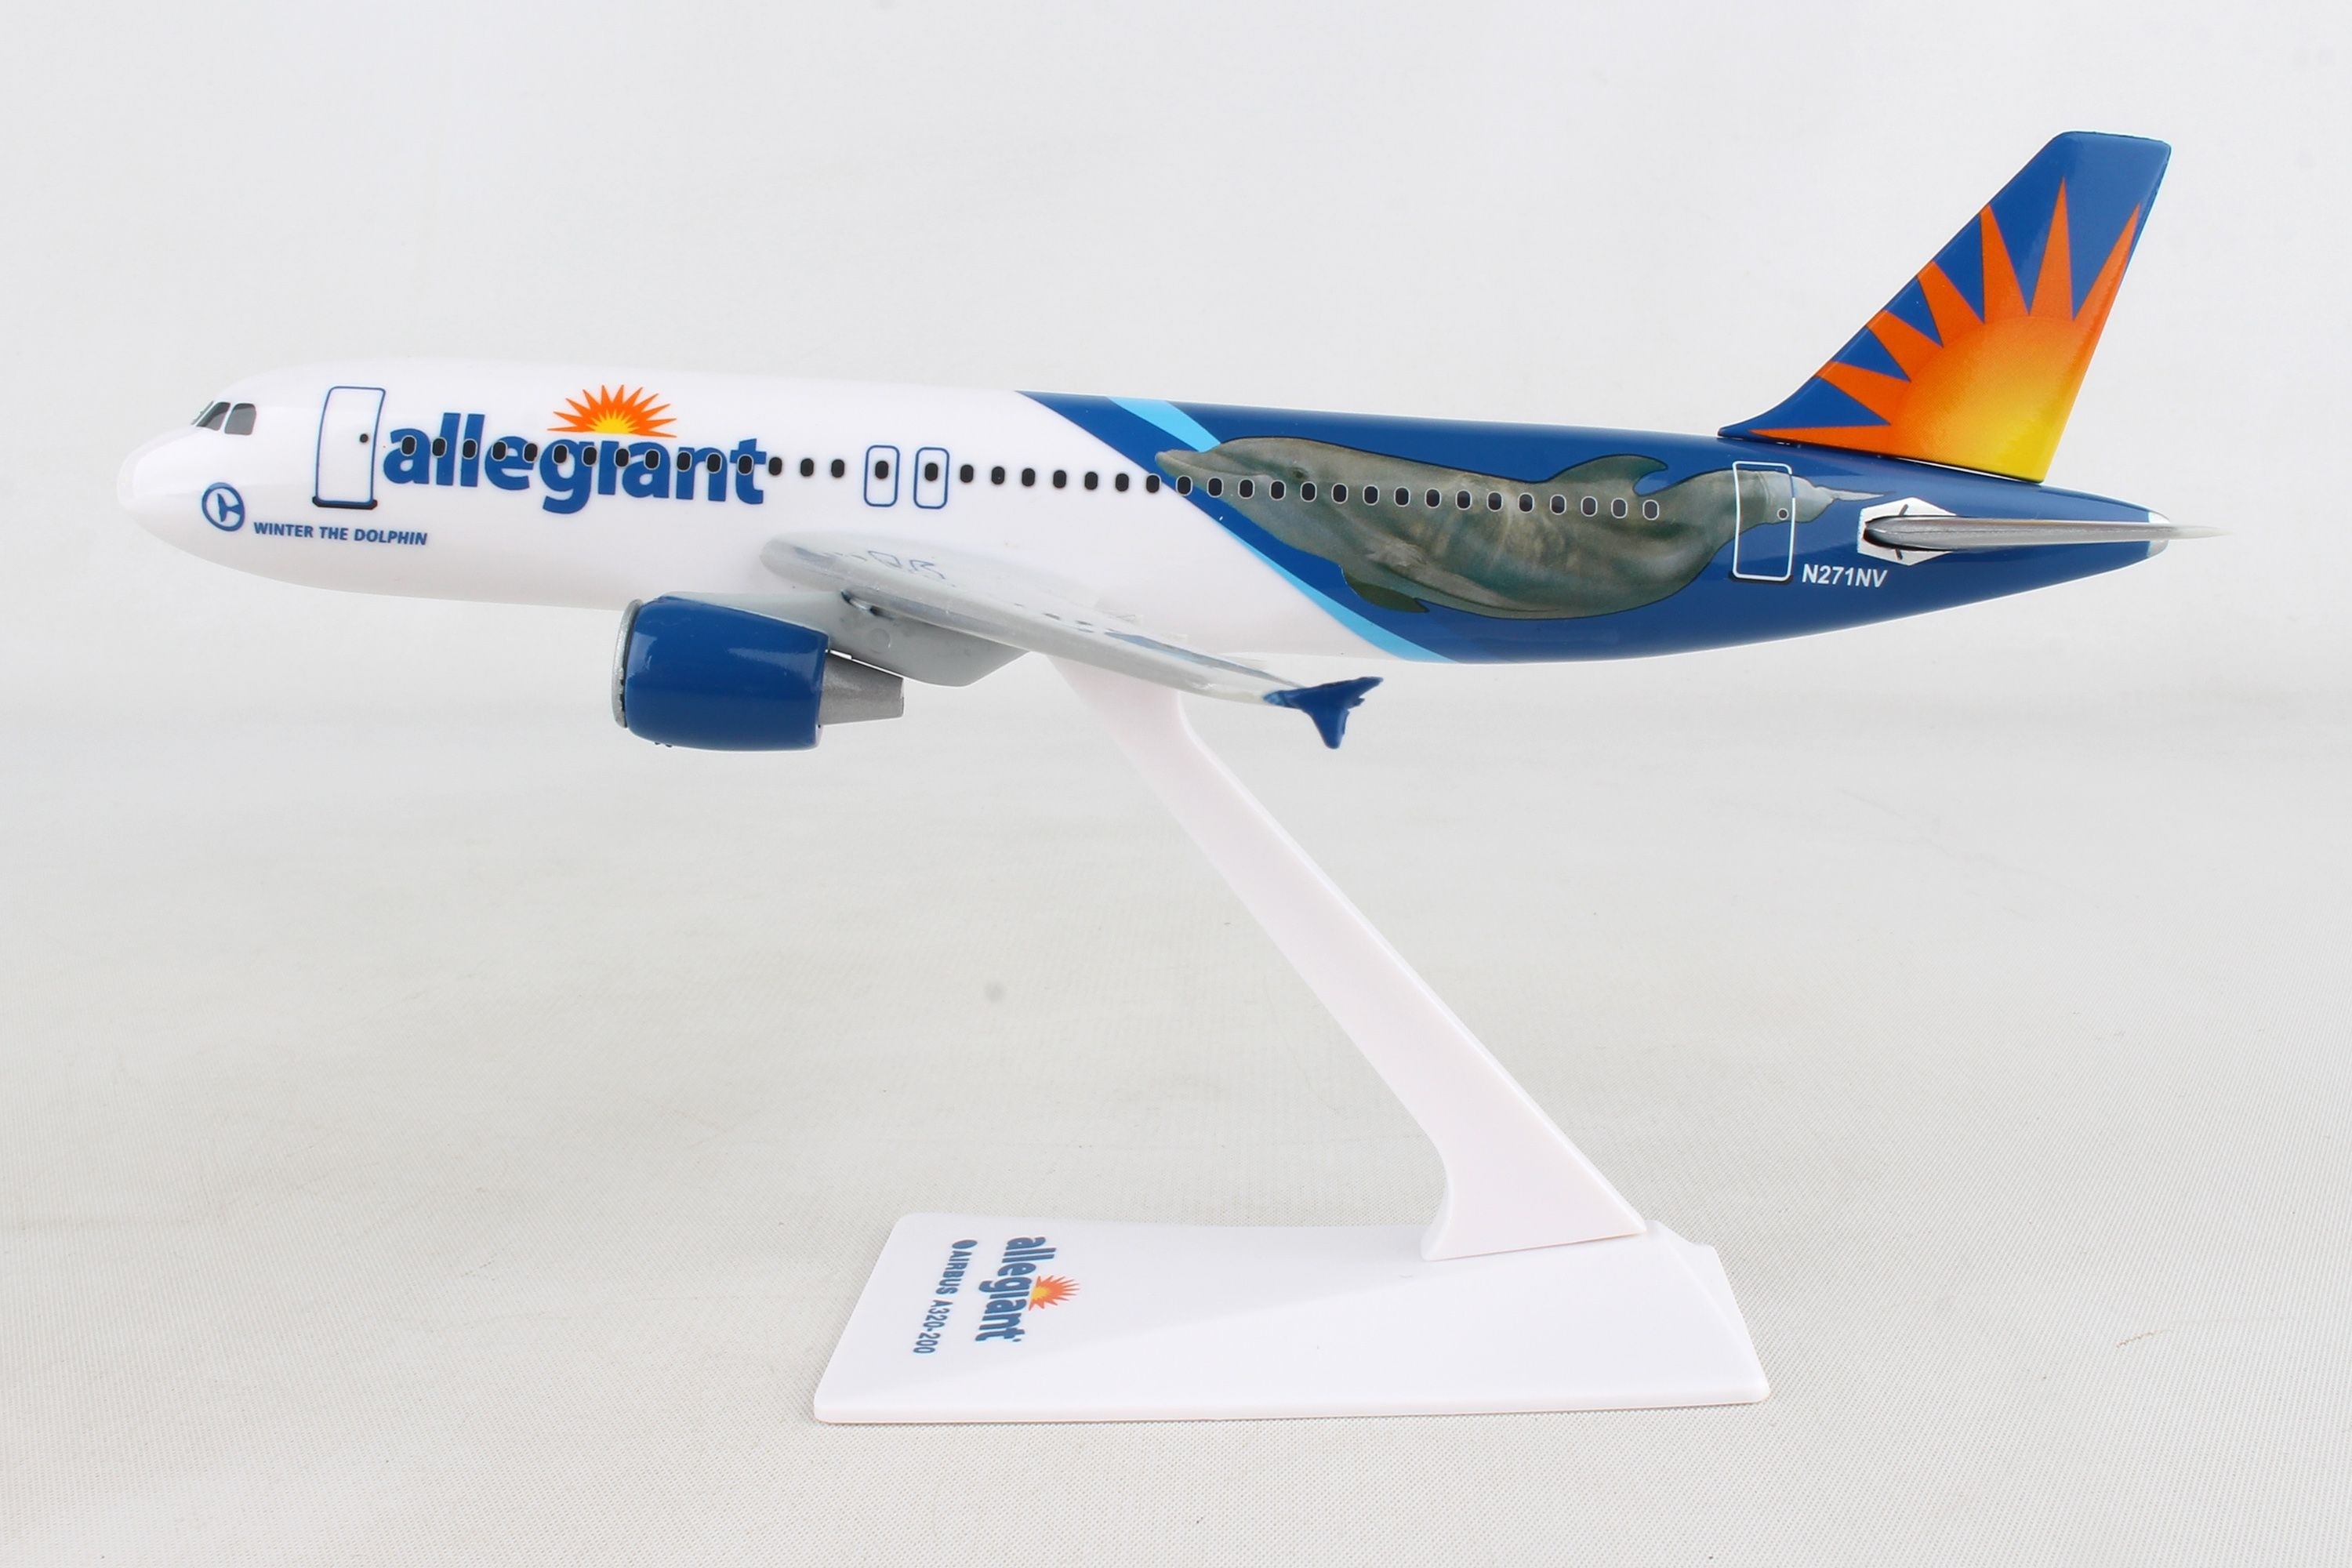 S Gemini Jets 1:200 Scale Allegiant Air Airbus A319 G2AAY663 